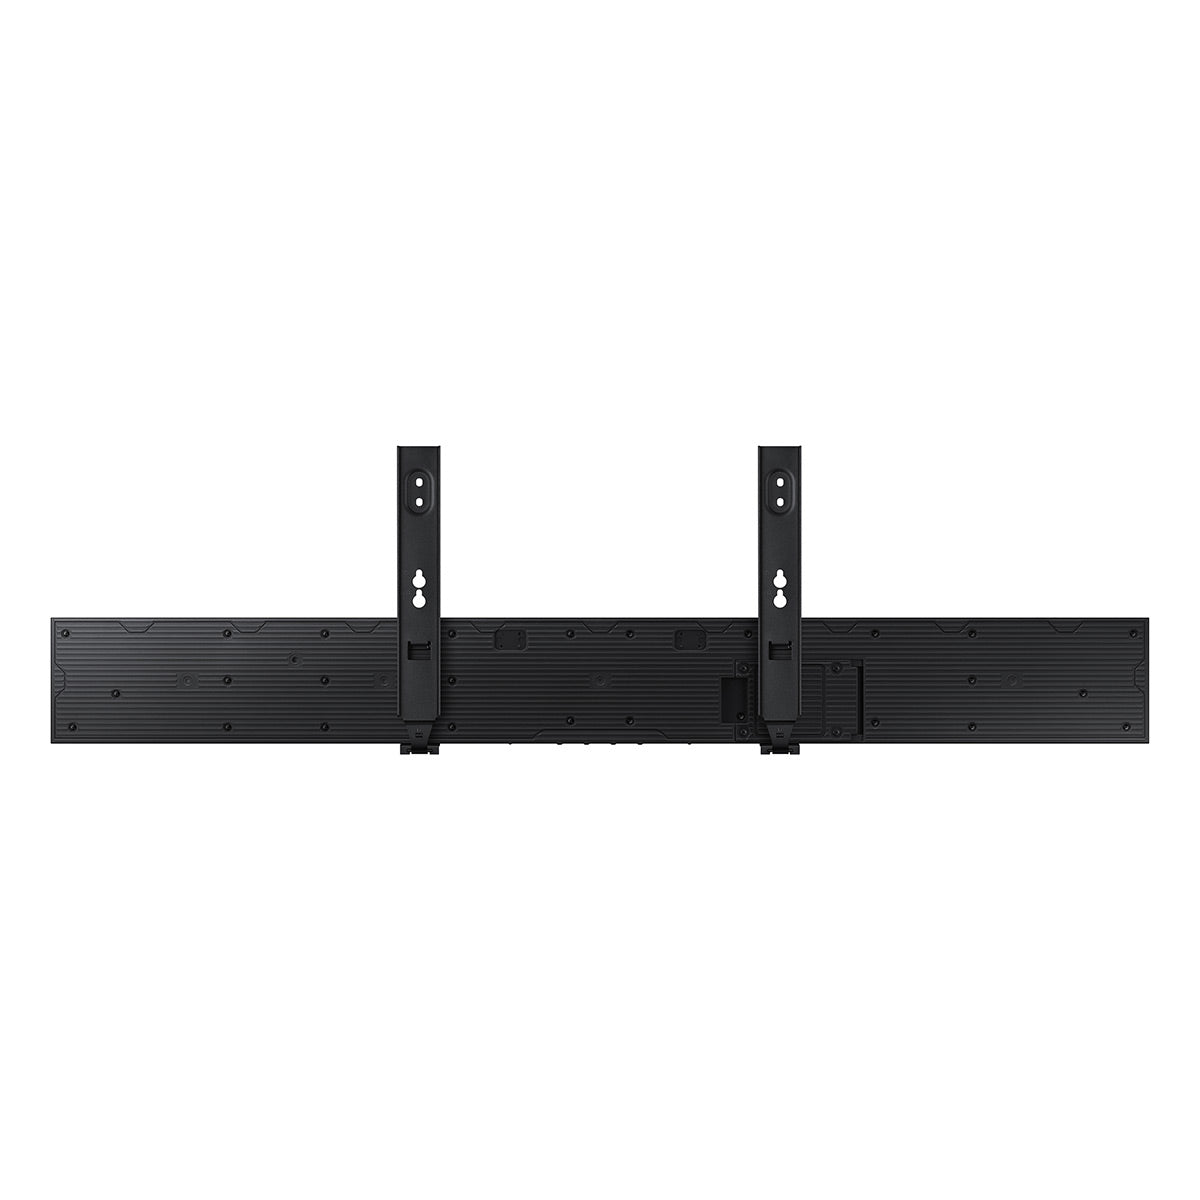 Samsung QN65LS03BA 65" The Frame QLED 4K Smart TV (2022) with HW-LST70T 3.0ch The Terrace Soundbar with Dolby 5.1ch